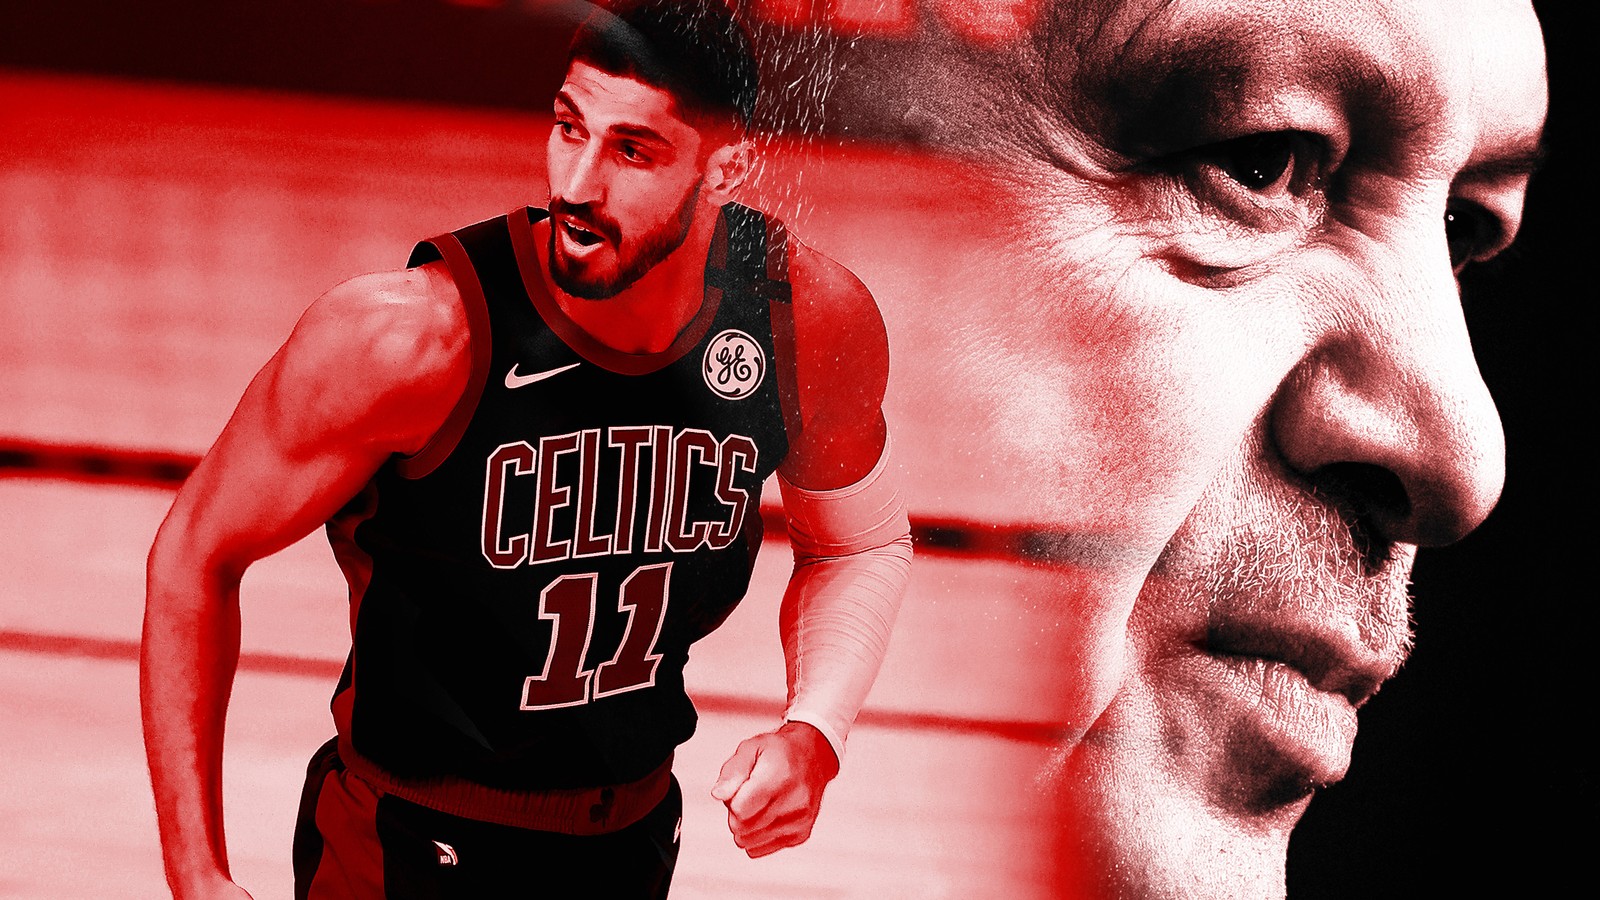 Turkish Government to Enes Kanter: You are 'a member of a